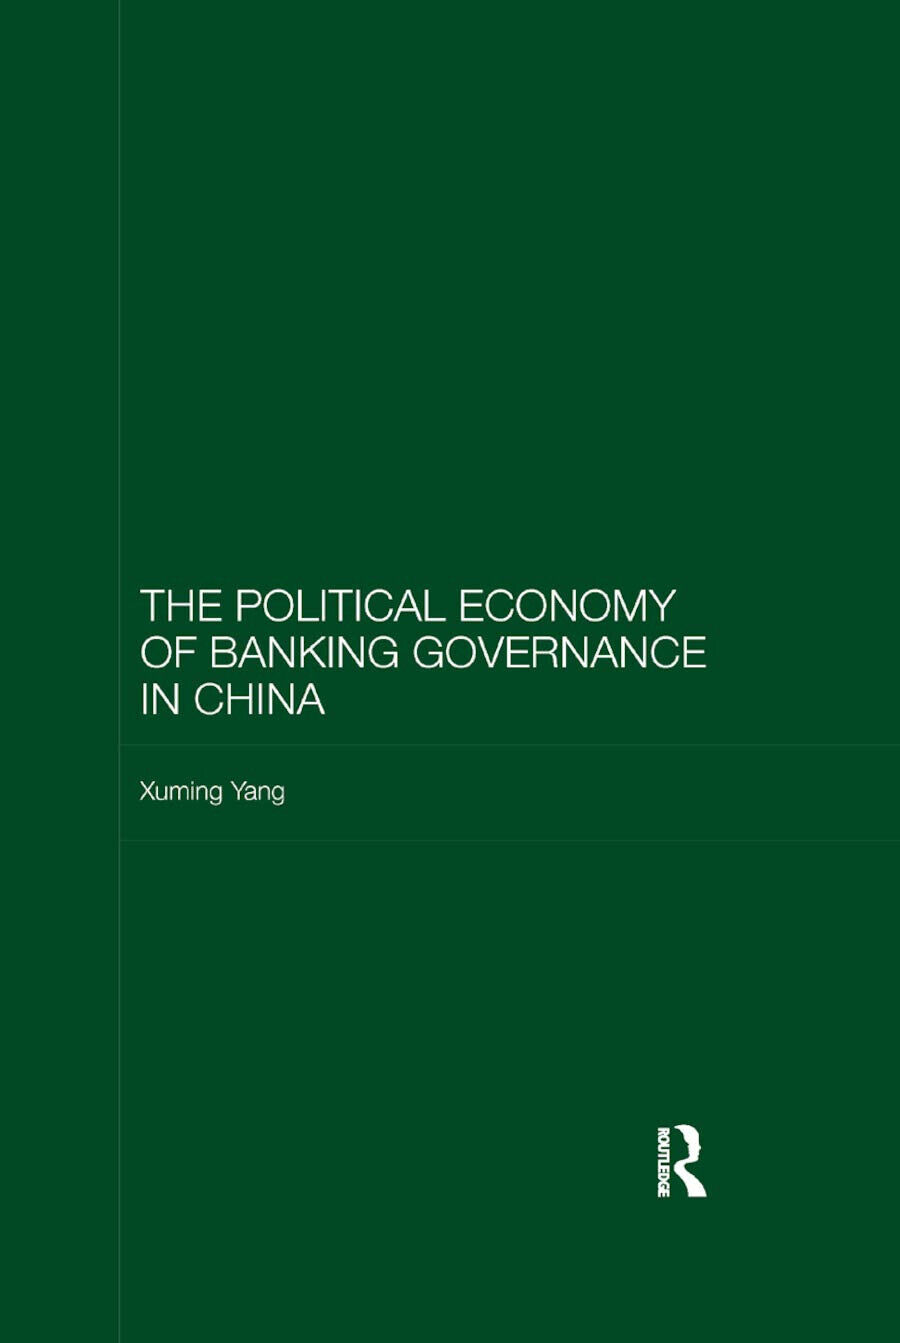 The Political Economy Of Banking Governance In China - Xuming Yang - 2019